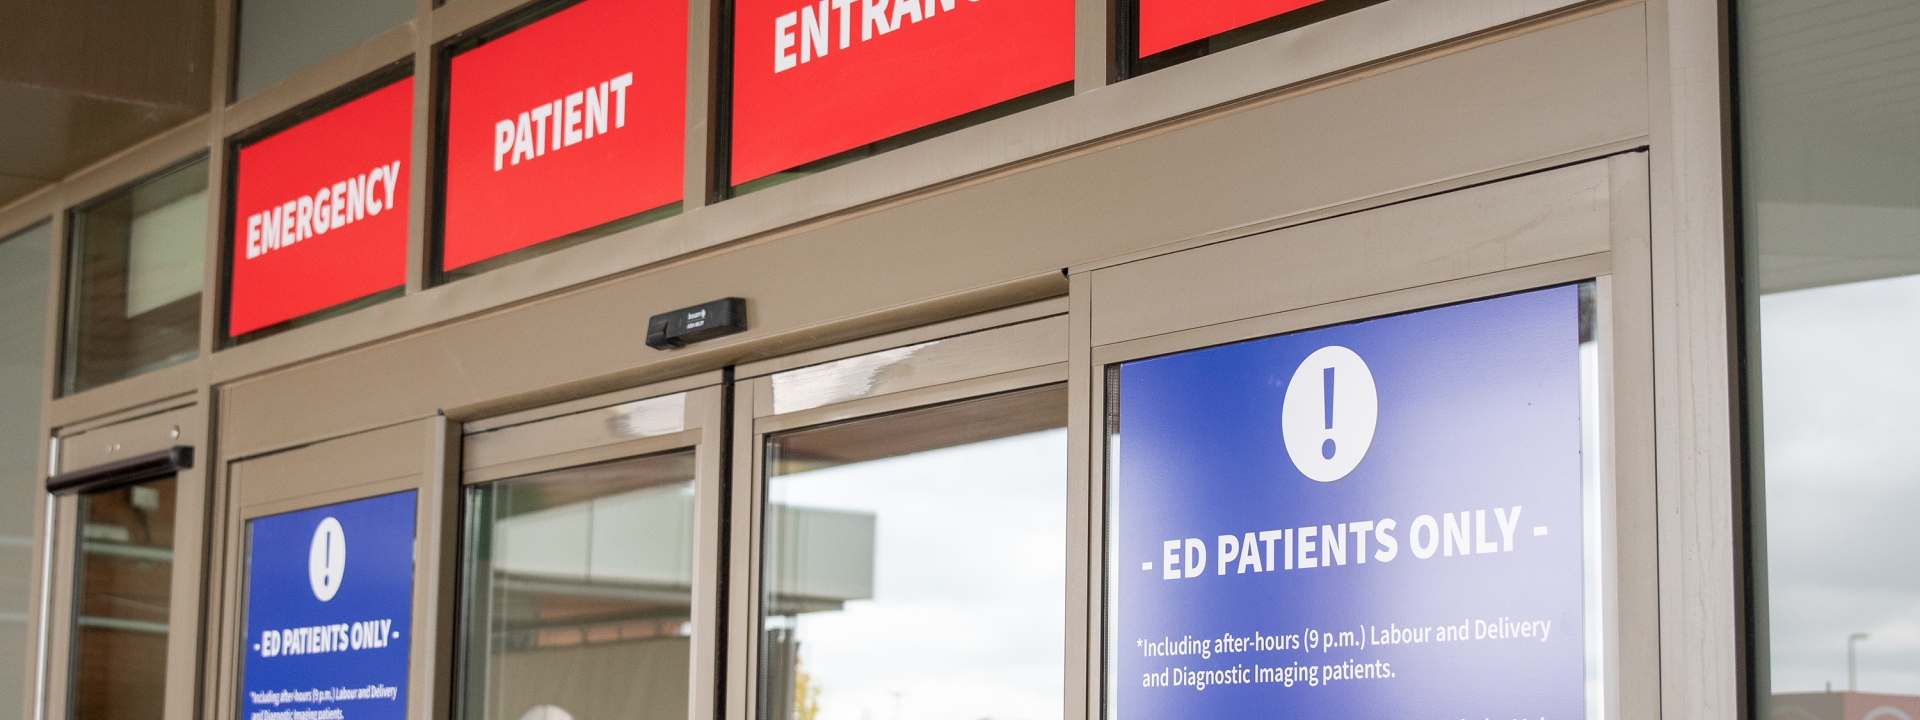 the emergency doors at markham stouffville hospital. a red sign can be seen with "emergency patient entrance" in white lettering